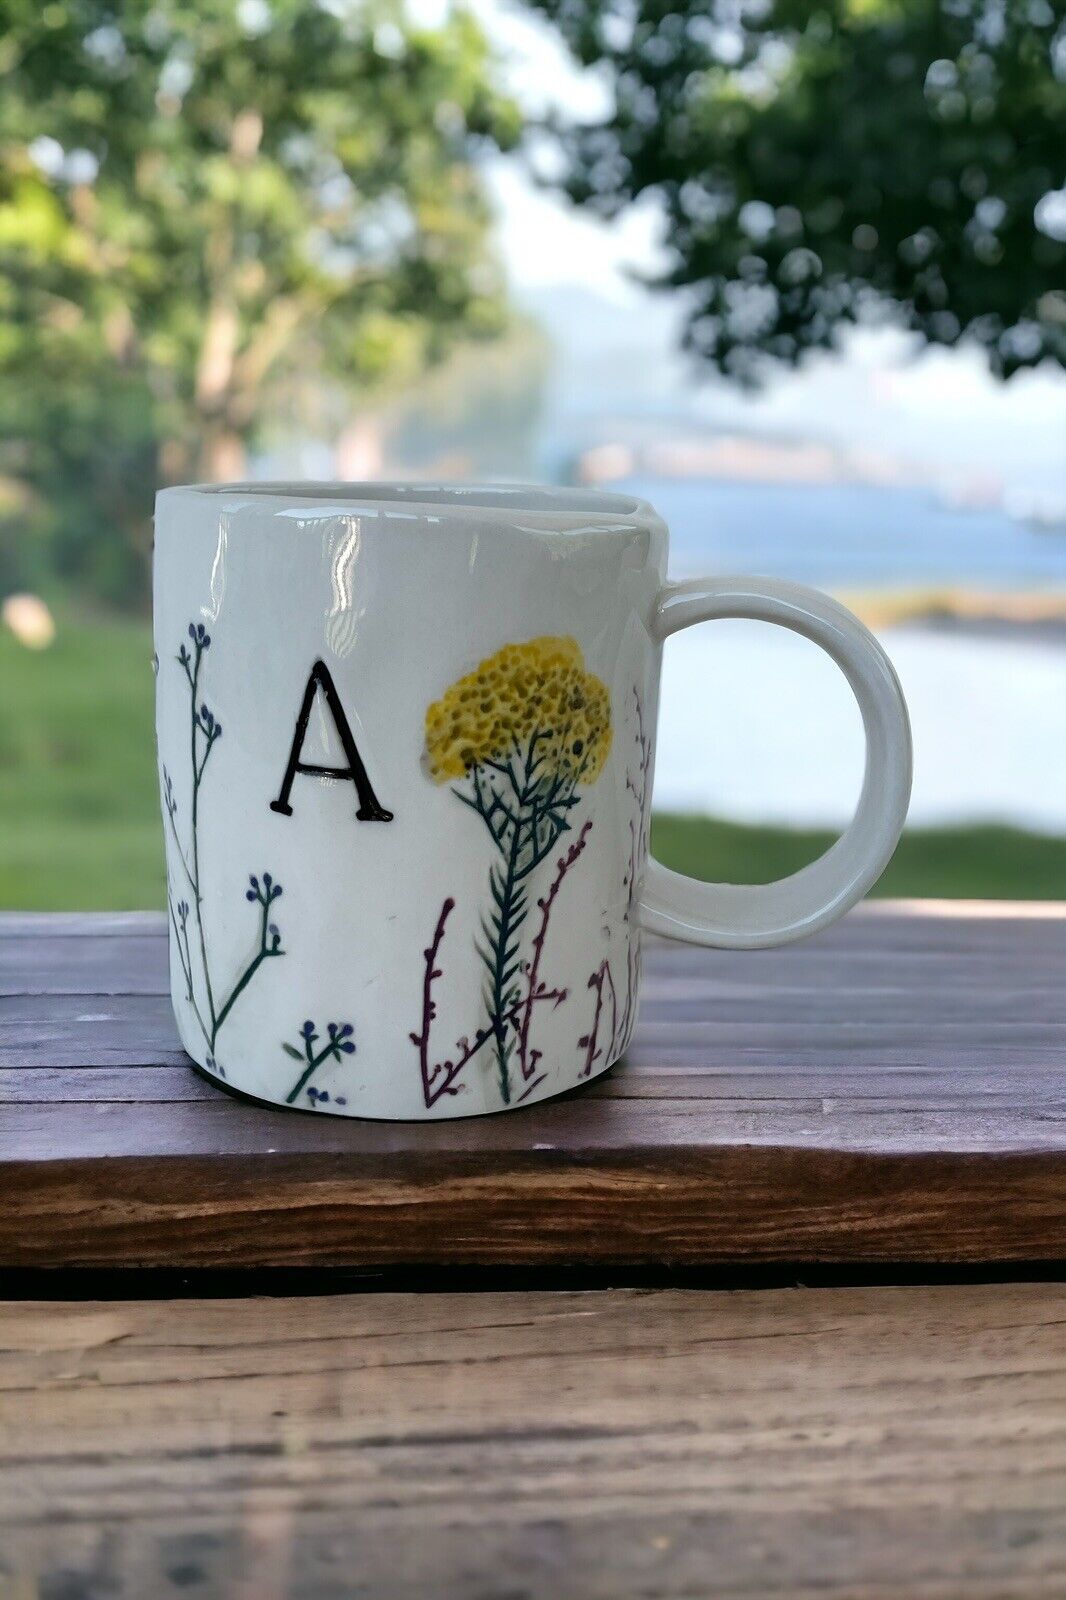 Anthropologie Mug DAGNY Monogram Initial Letter A Floral Coffee Cup